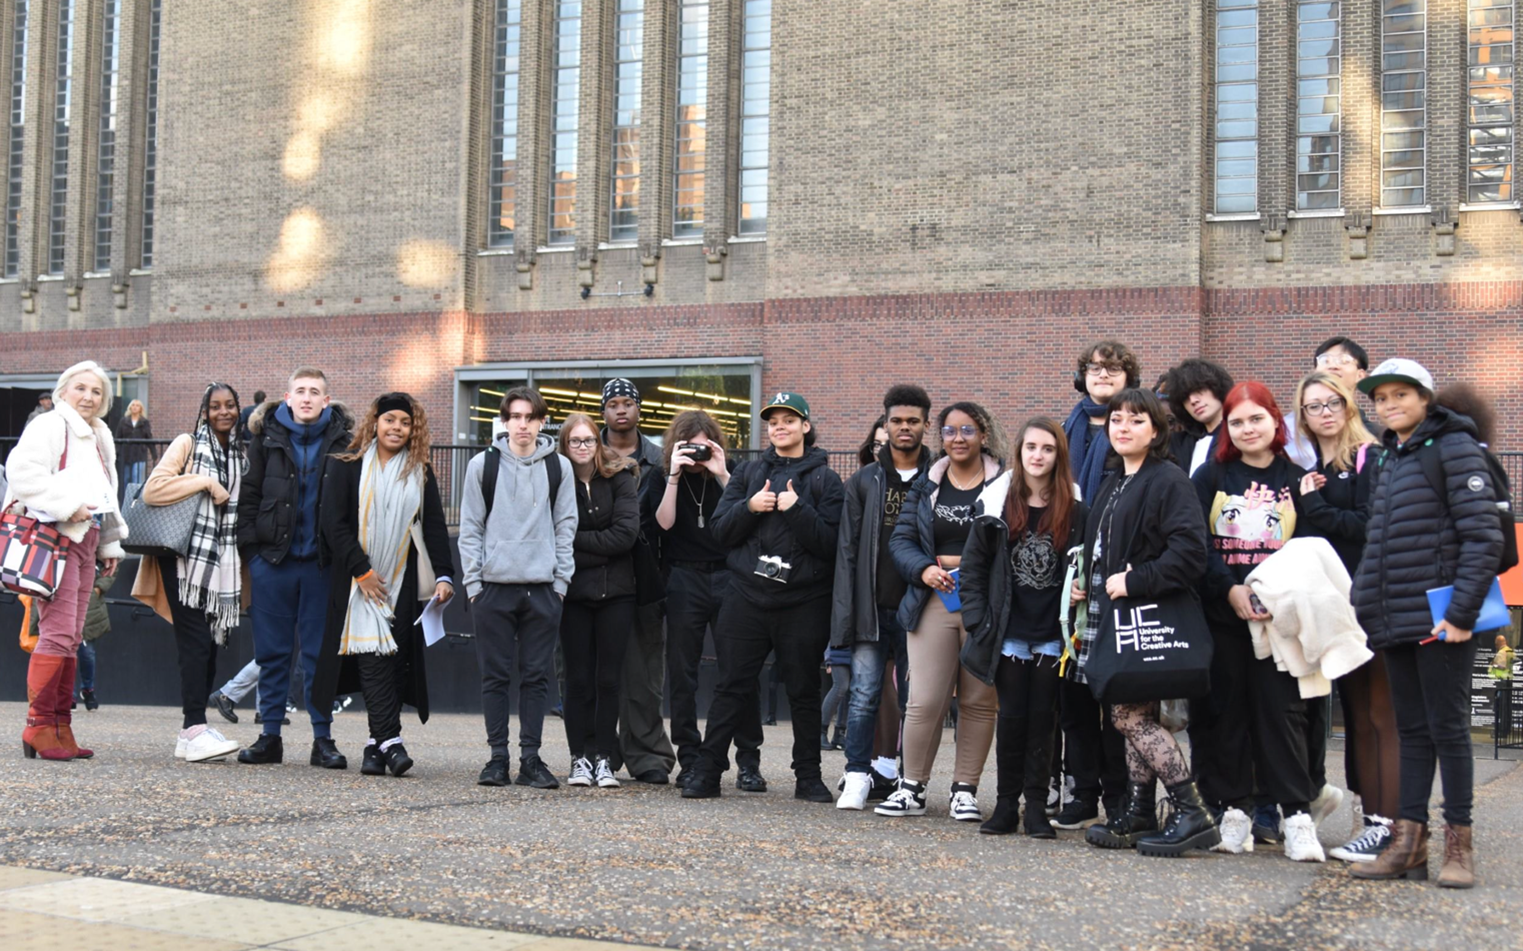 A large group of students outside the Tate Modern